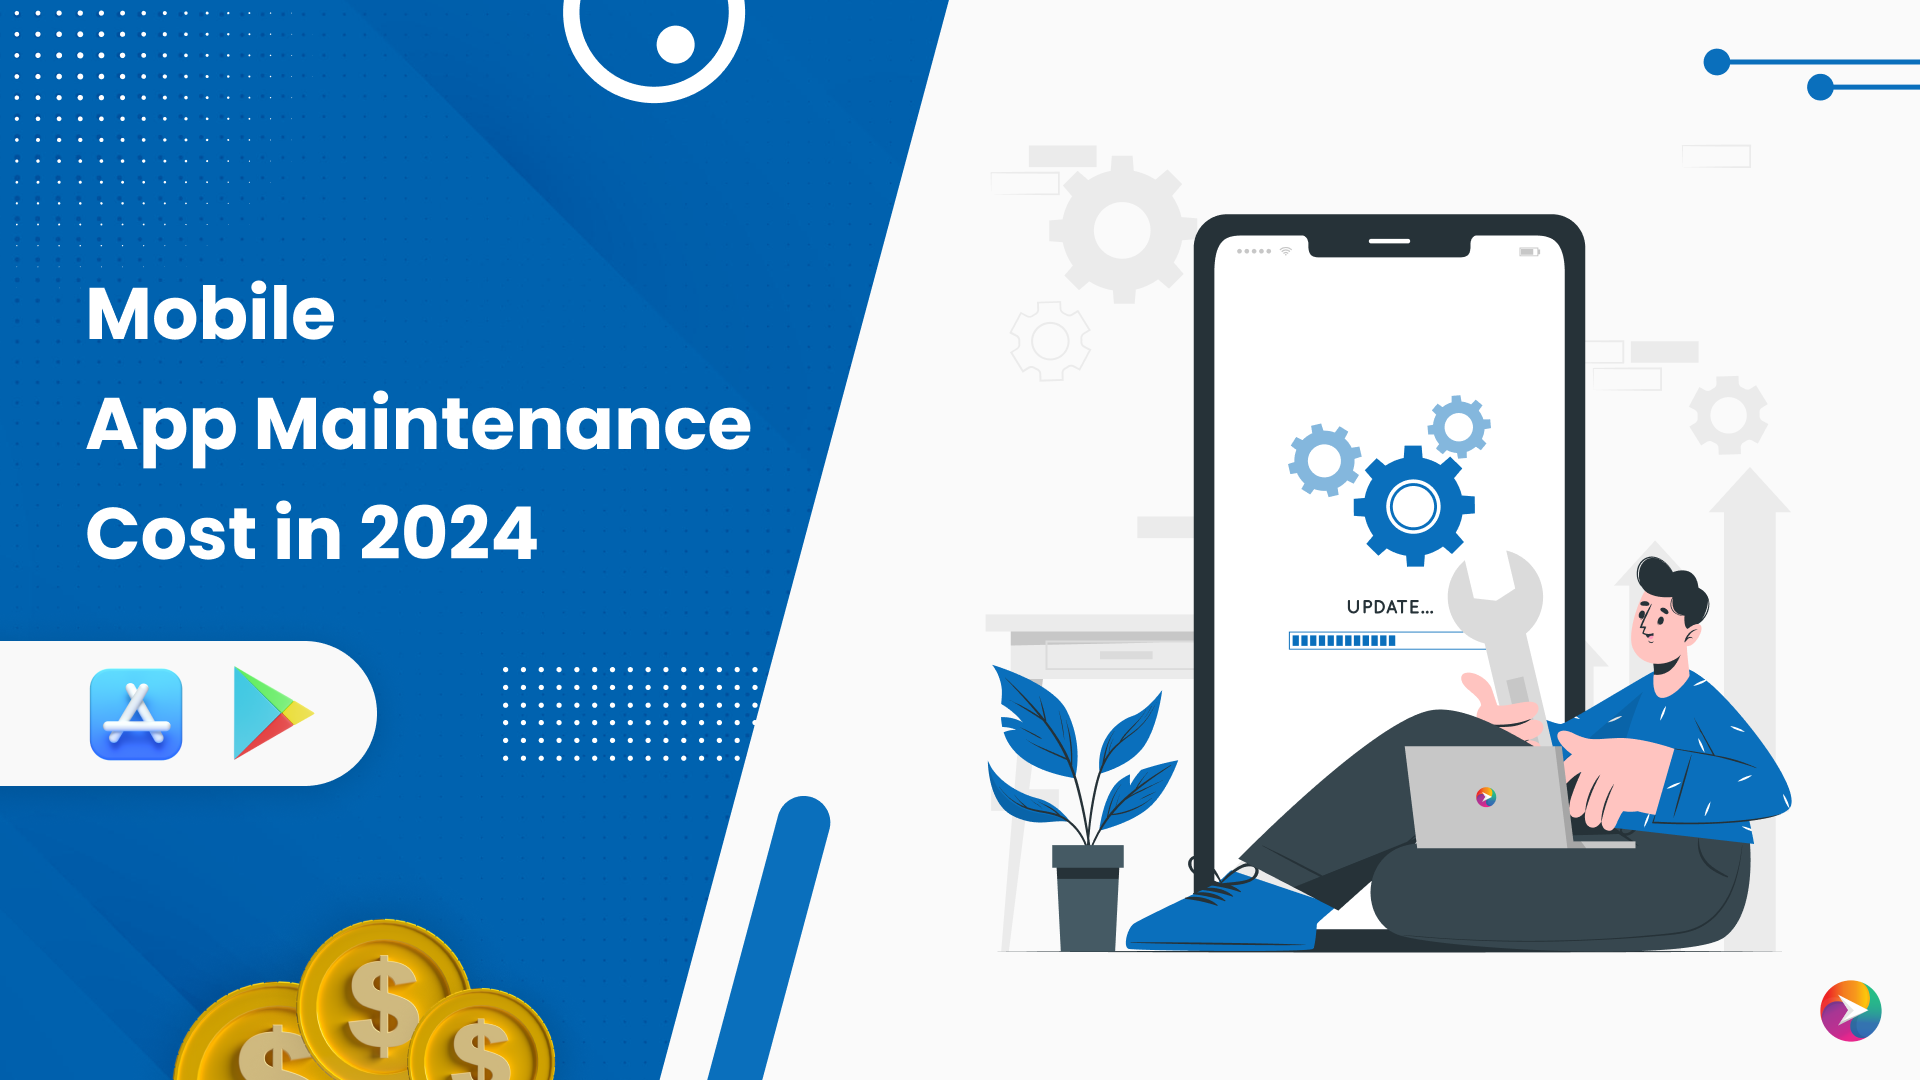 This image contains the heading "Mobile App Maintenance Cost in 2024" and a vector image of a mobile maintenance